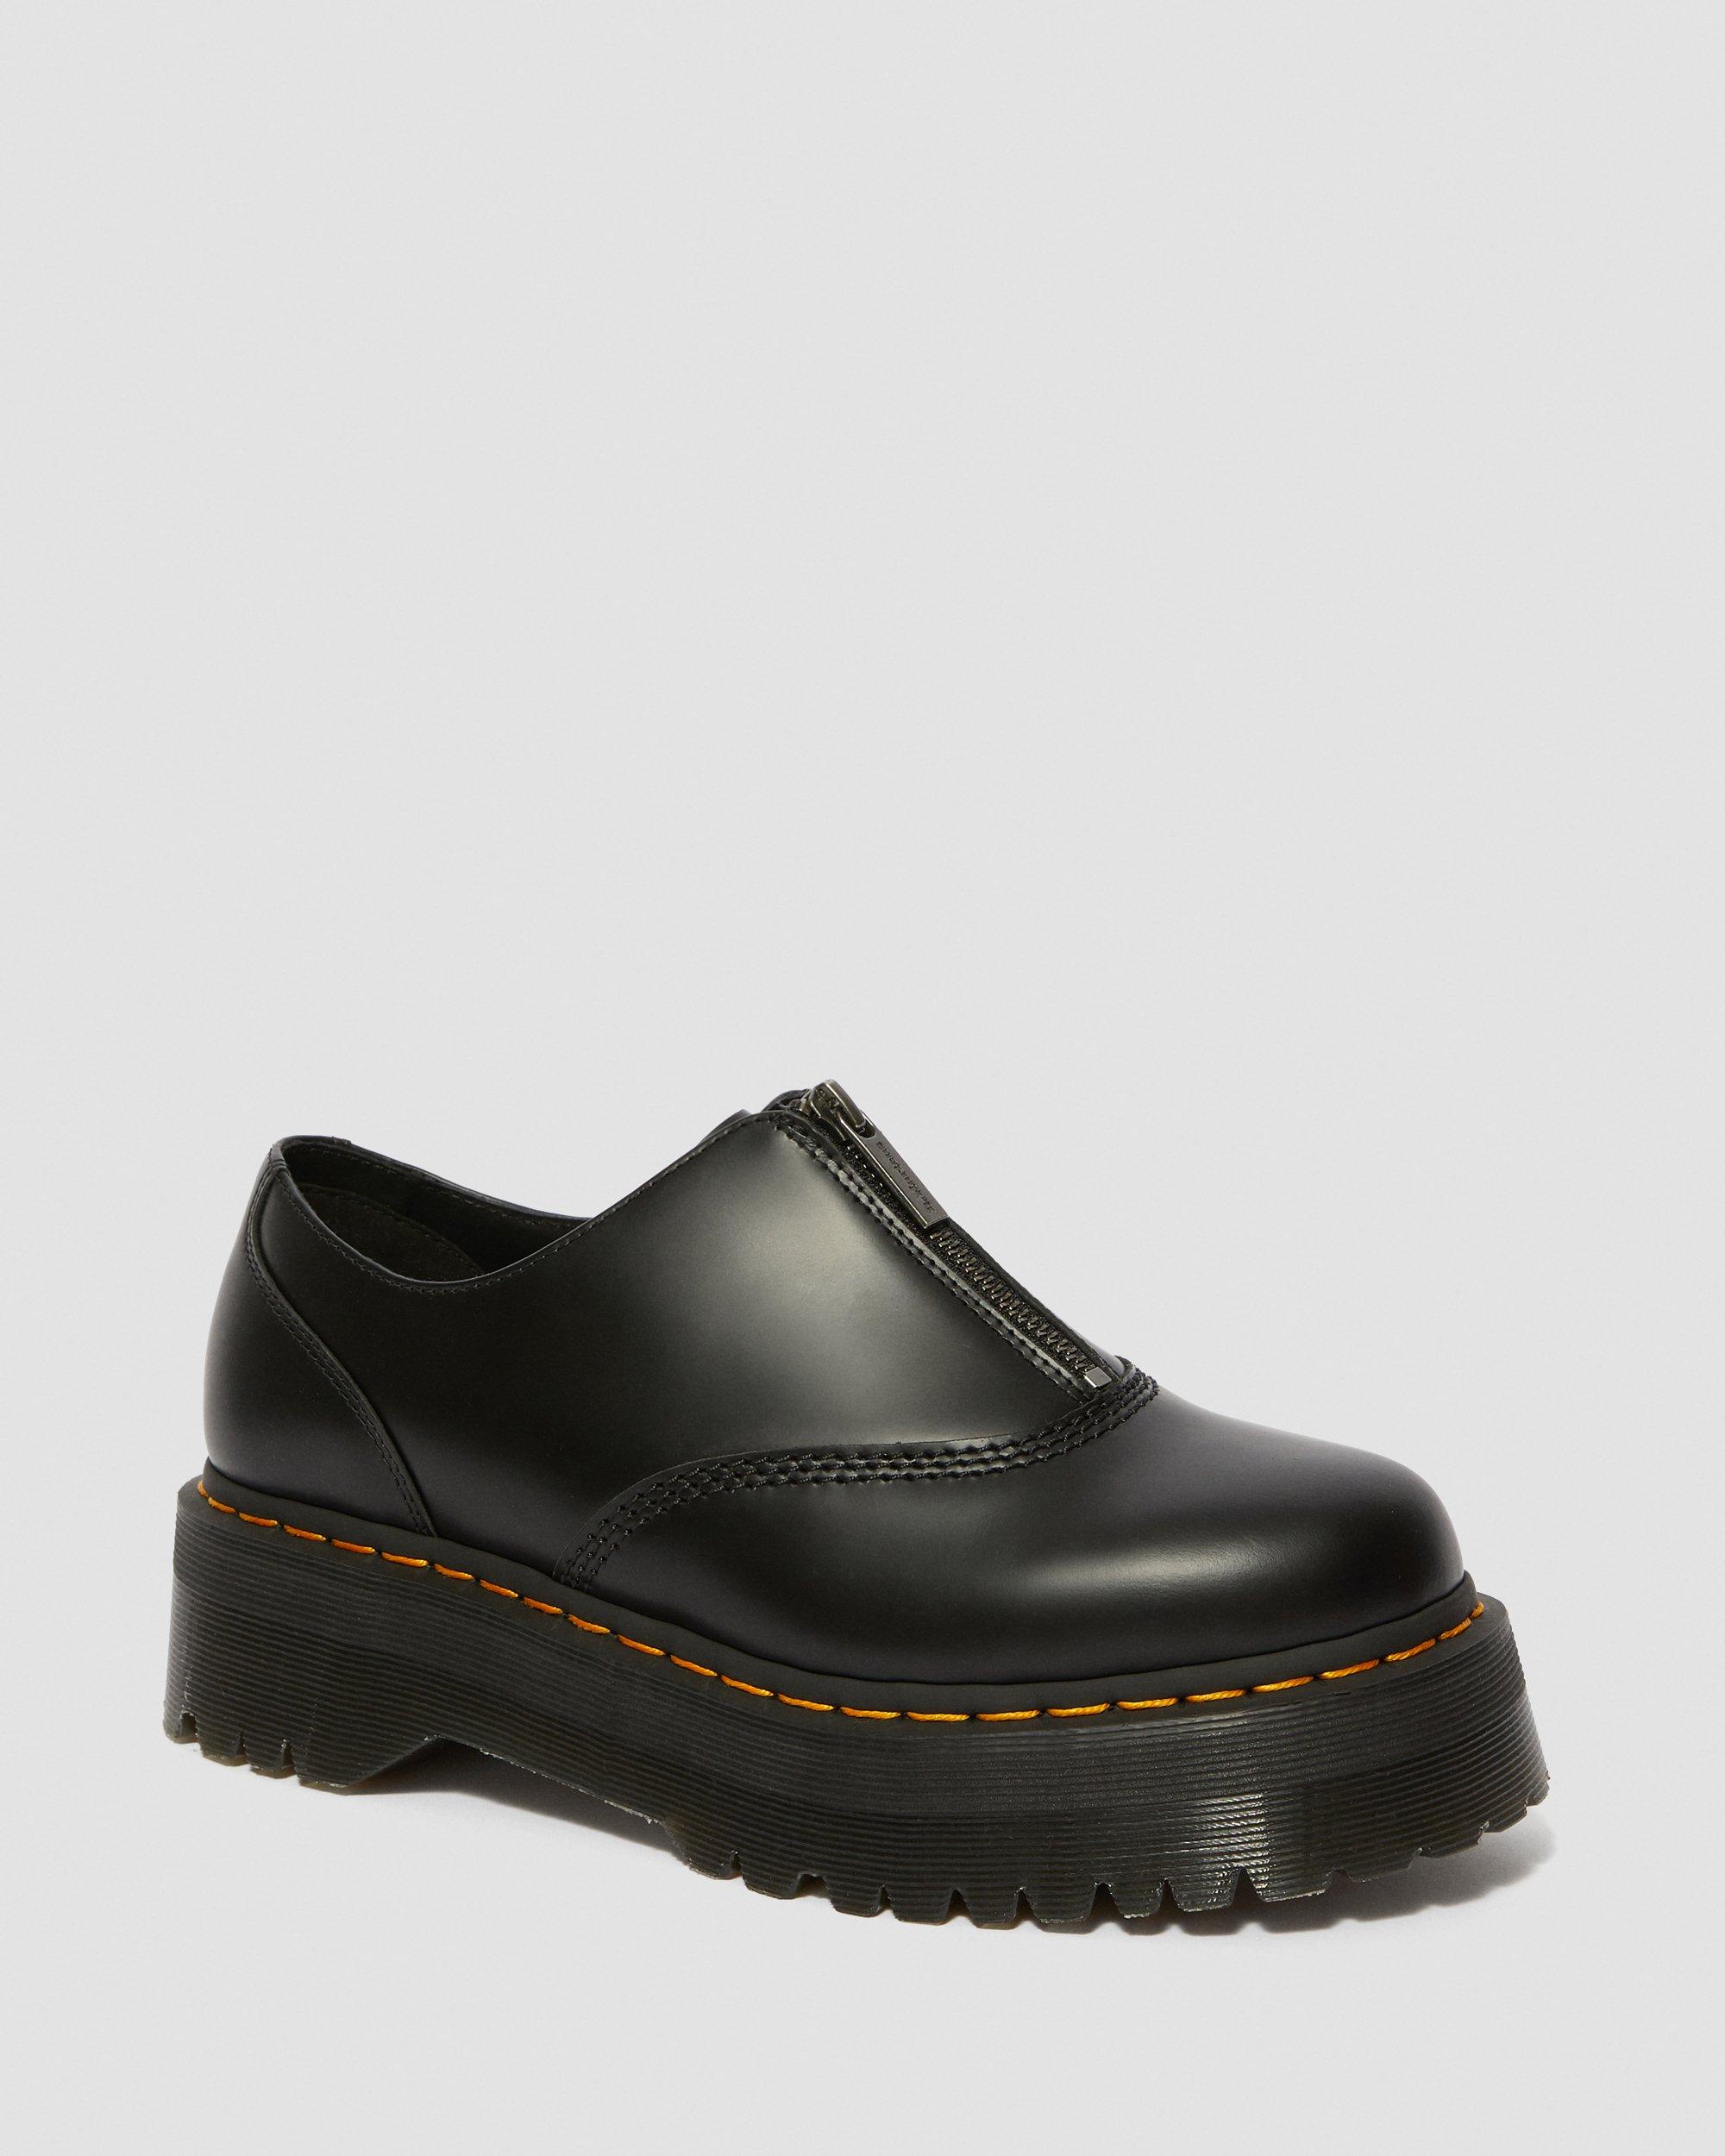 AURIAN II SMOOTH LEATHER PLATFORM SHOES 